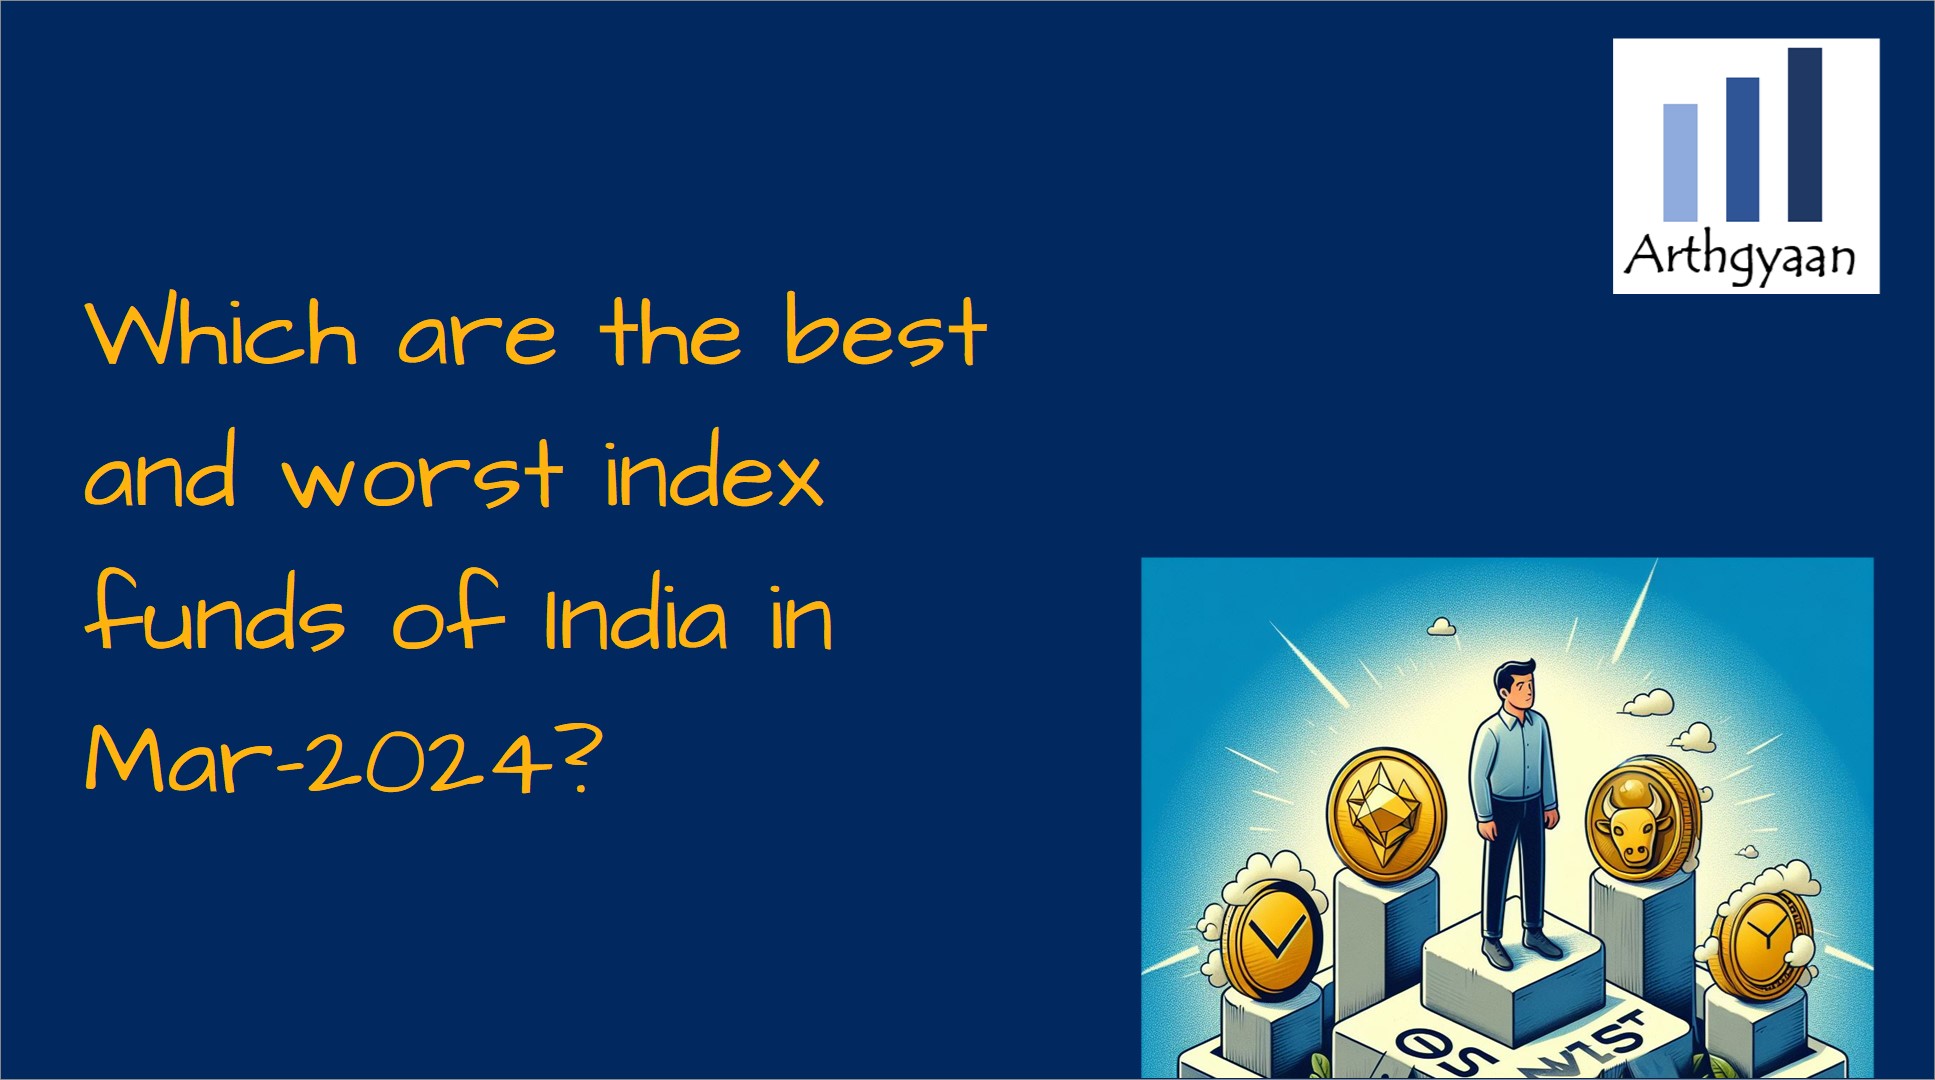 Which are the best and worst index funds of India in Mar-2024?